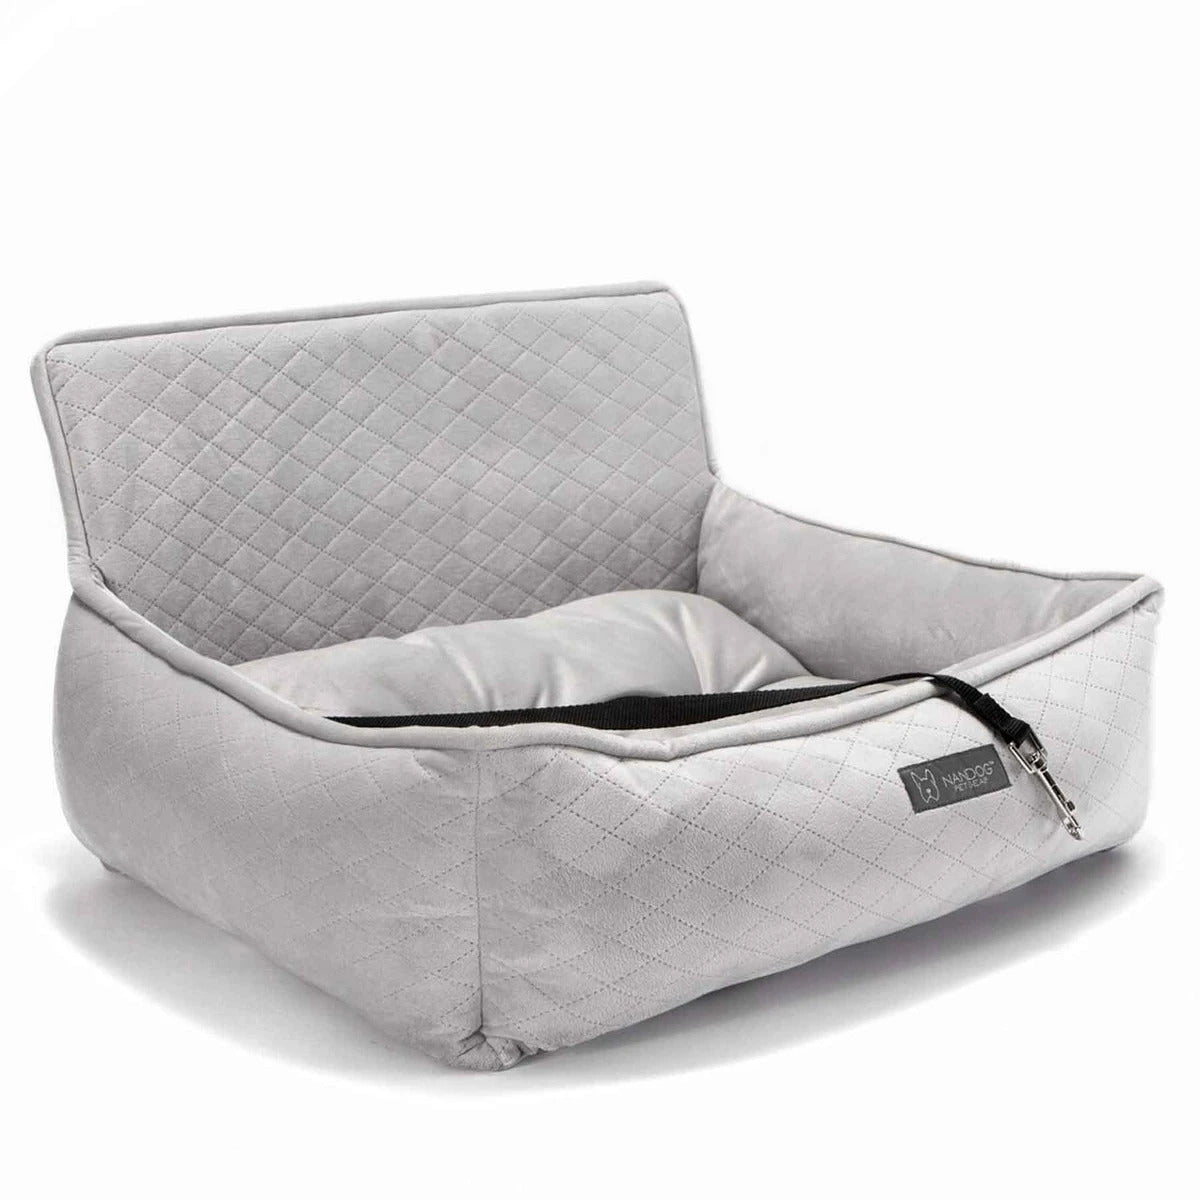 Quilted Car Seat - Light Grey